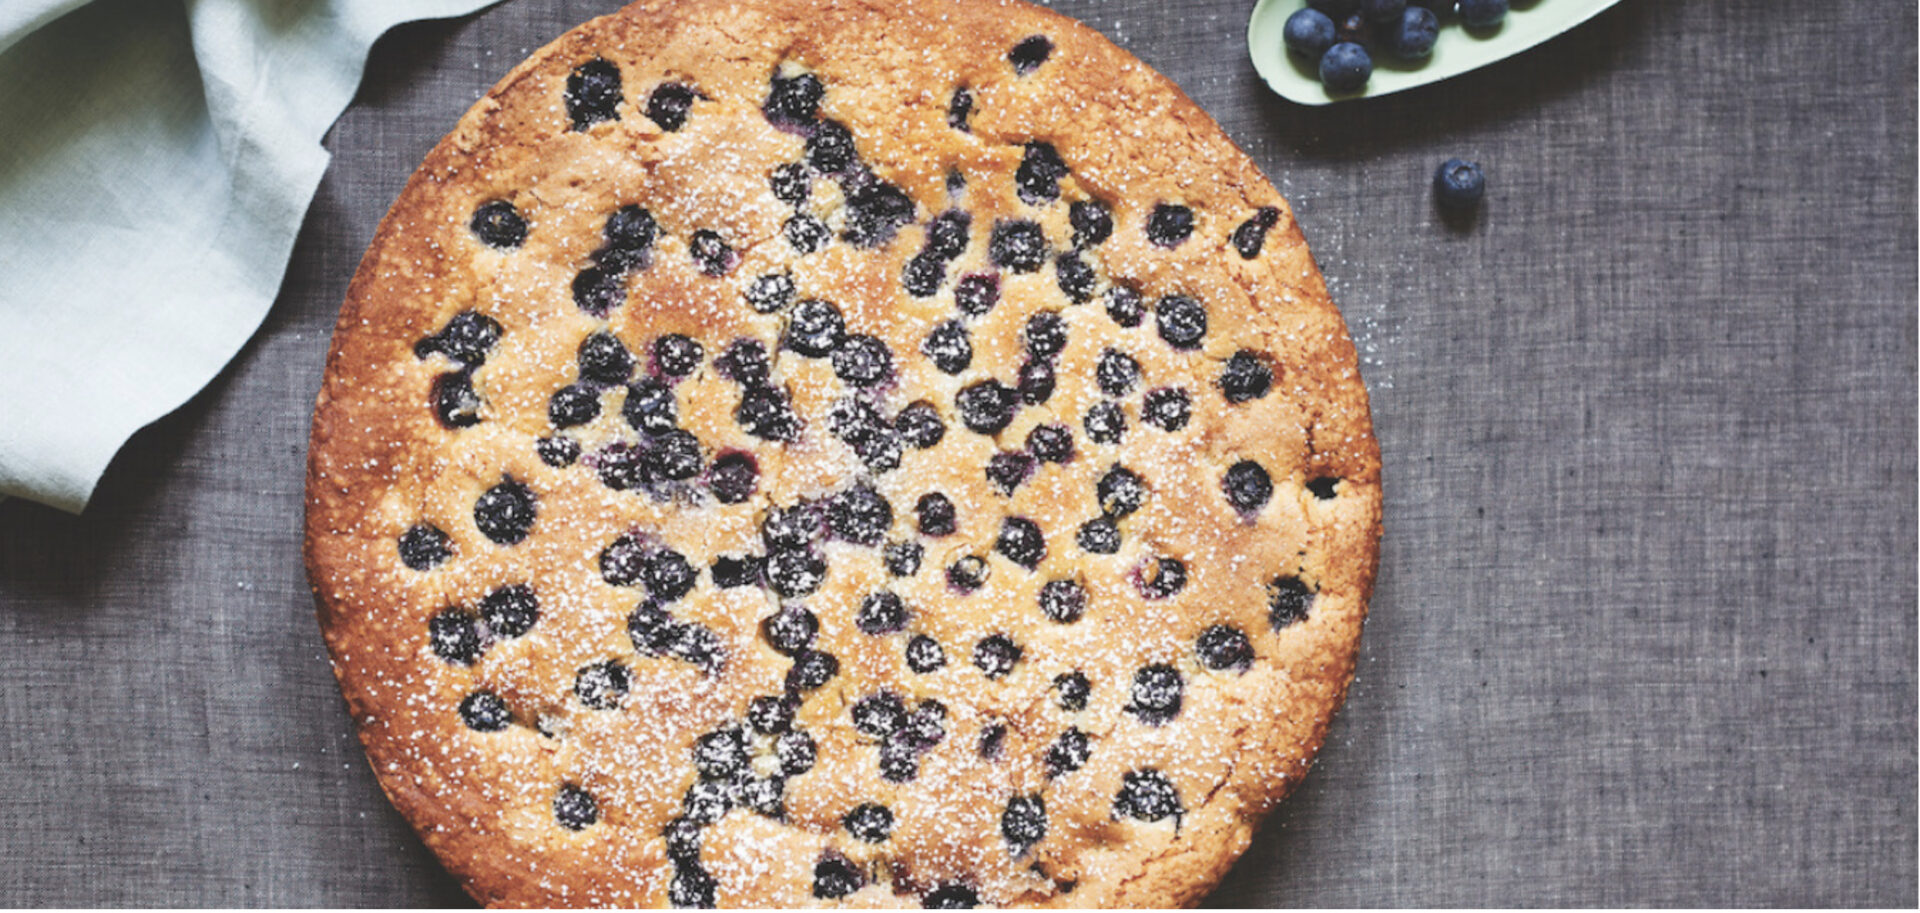 Blueberry Lemon Ricotta cake on a grey background with a napkin and stray berries beside it